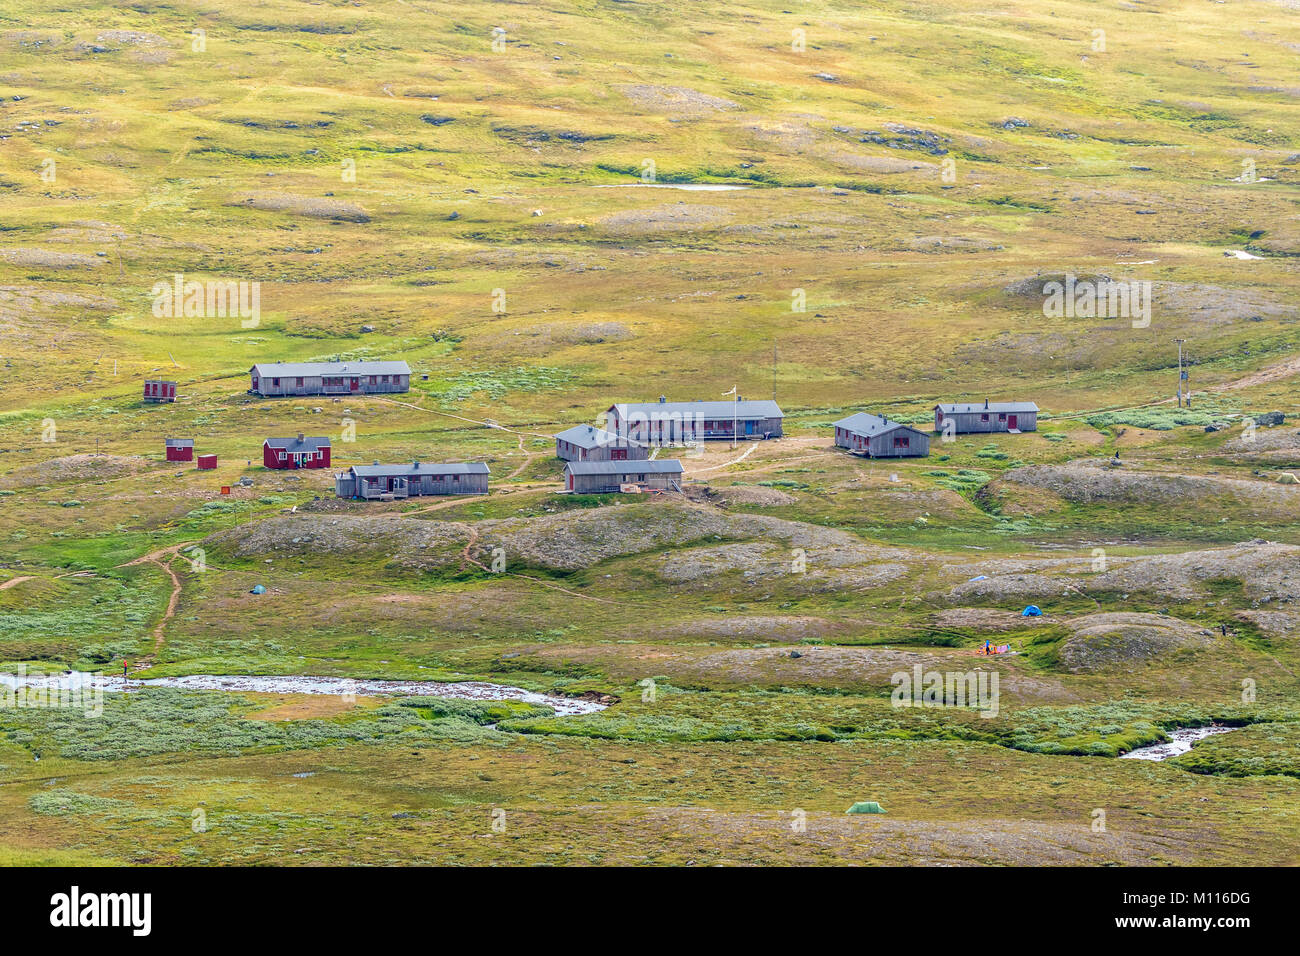 Helags mountain lodge in the Swedish mountains Stock Photo